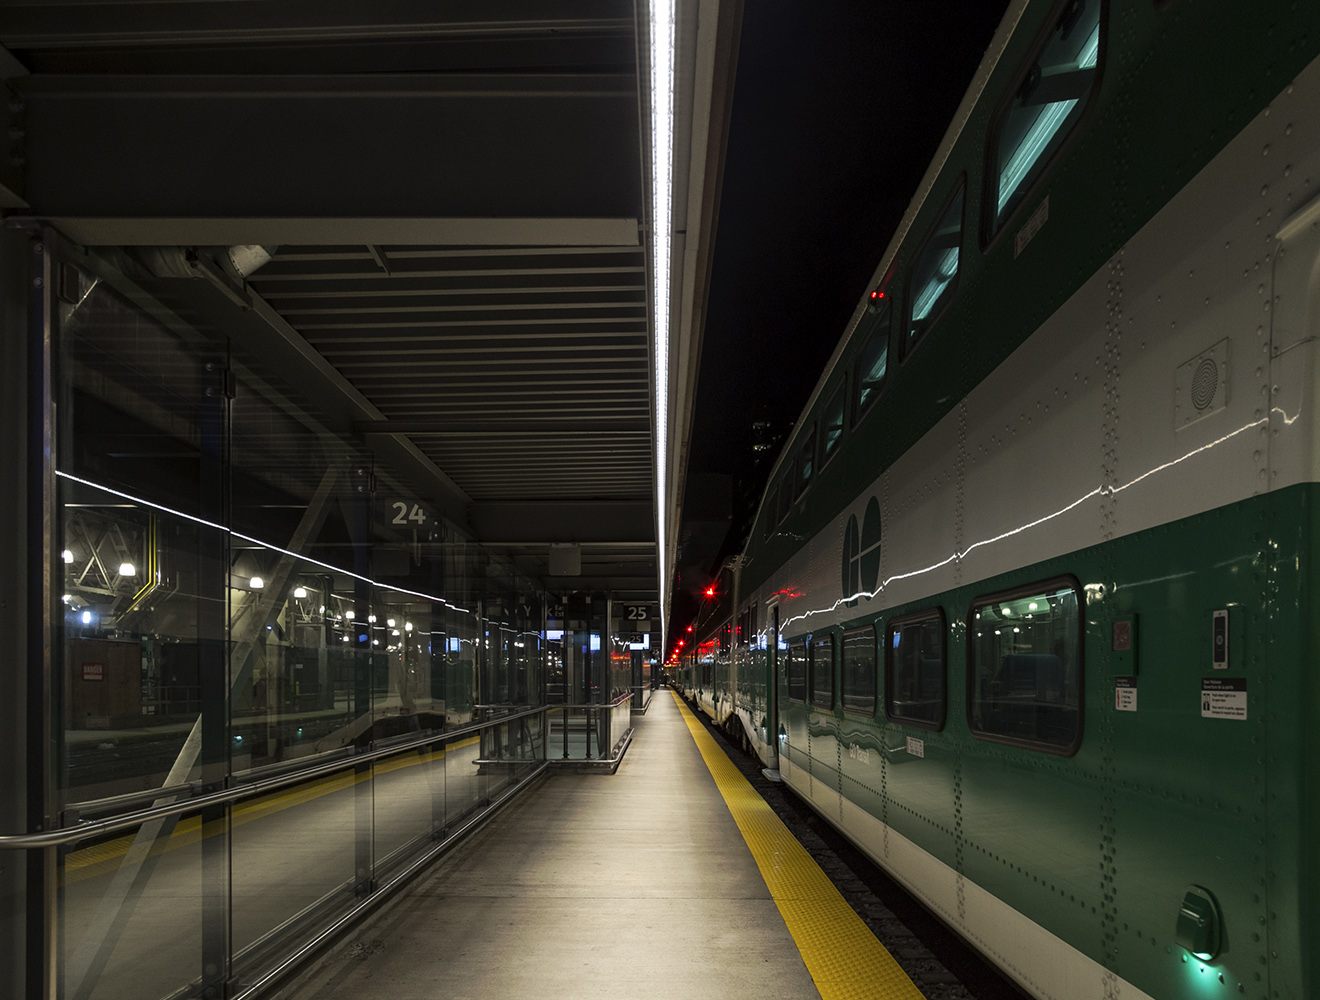 20170110. A GO Train prepares for imminent departure from Union